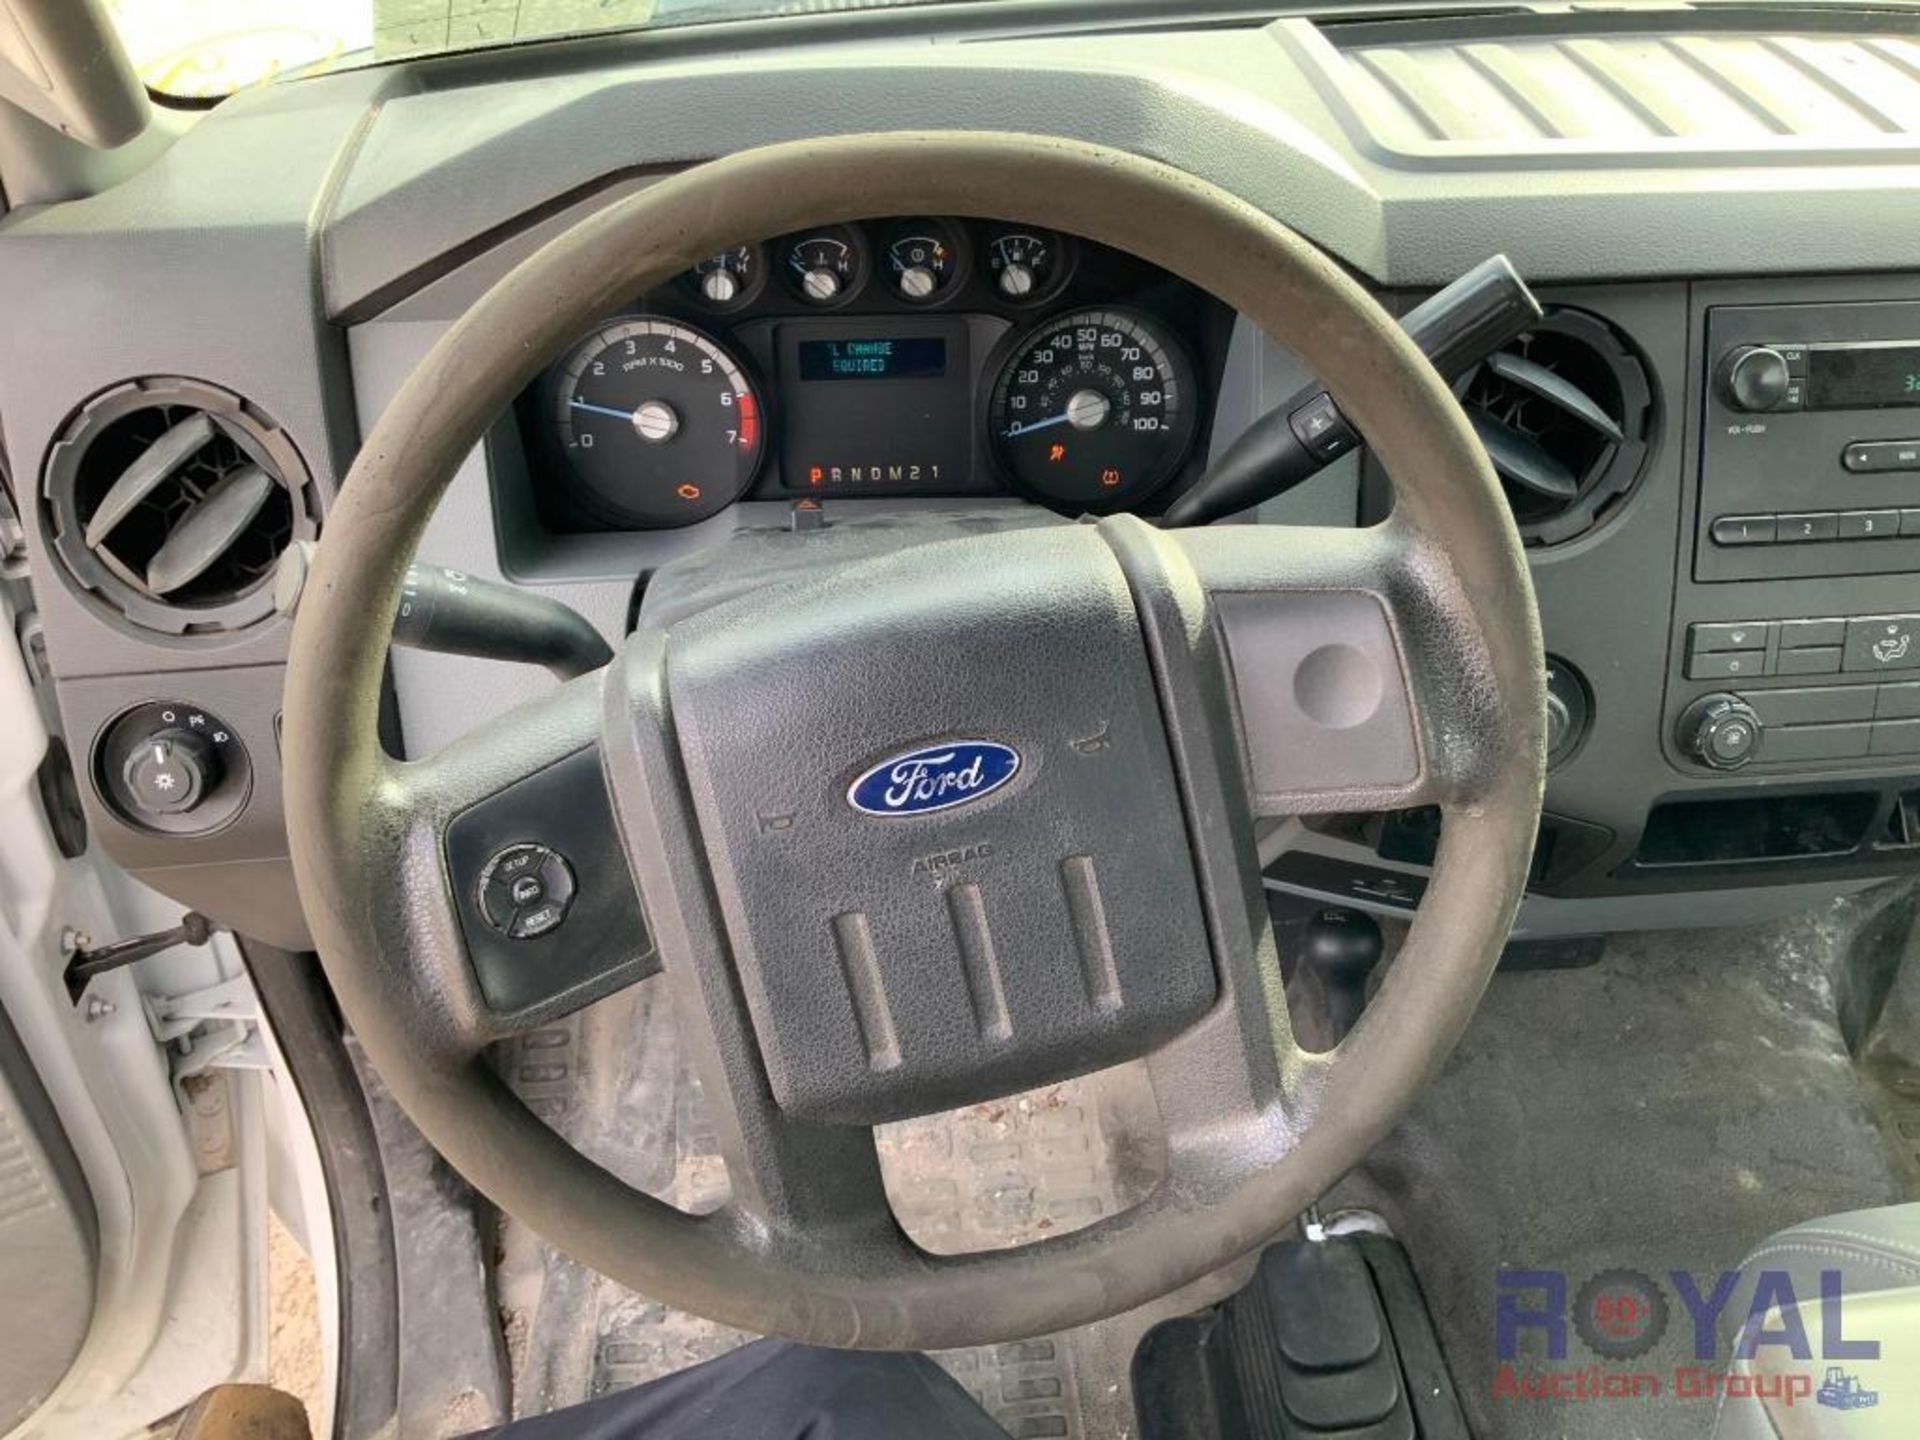 2013 Ford F250 4x4 Service Truck - Image 15 of 27